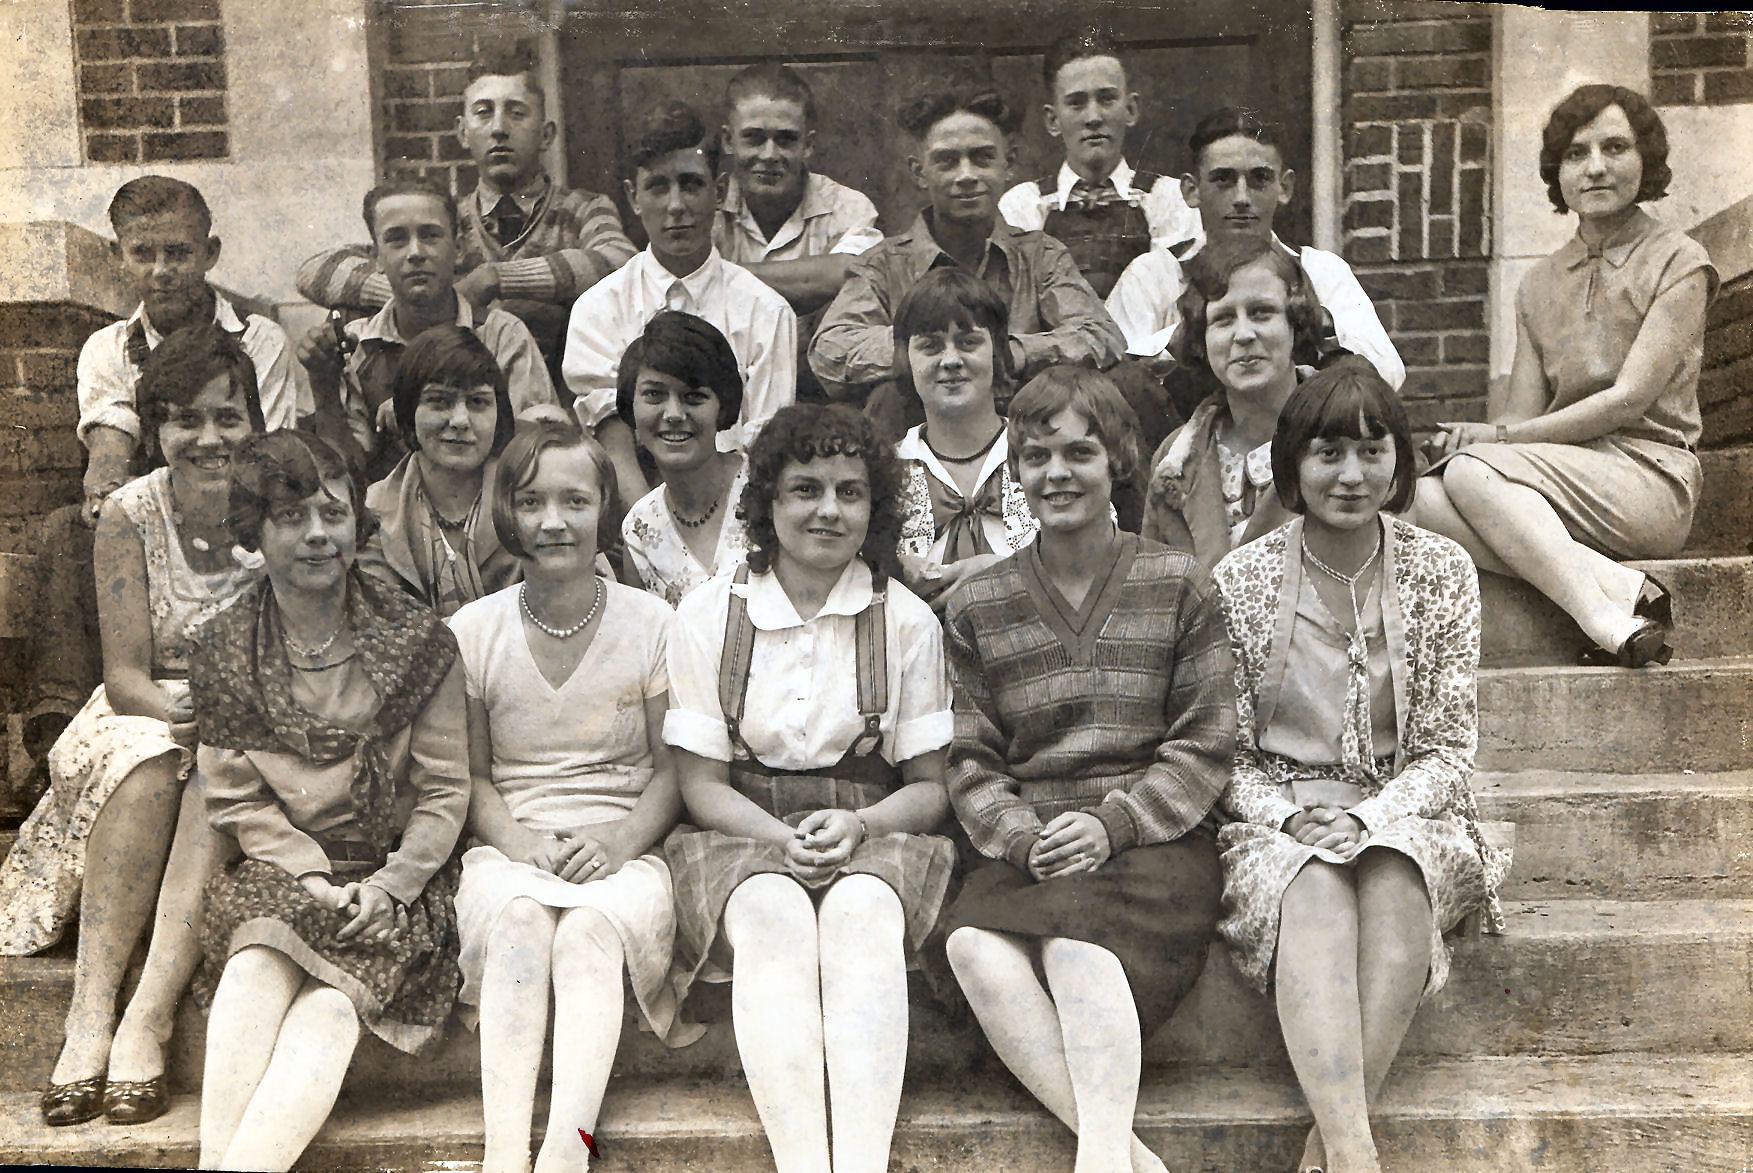 This is a class photo from Verdon, Nebraska. My grandmother Muriel is front row, second from the right.